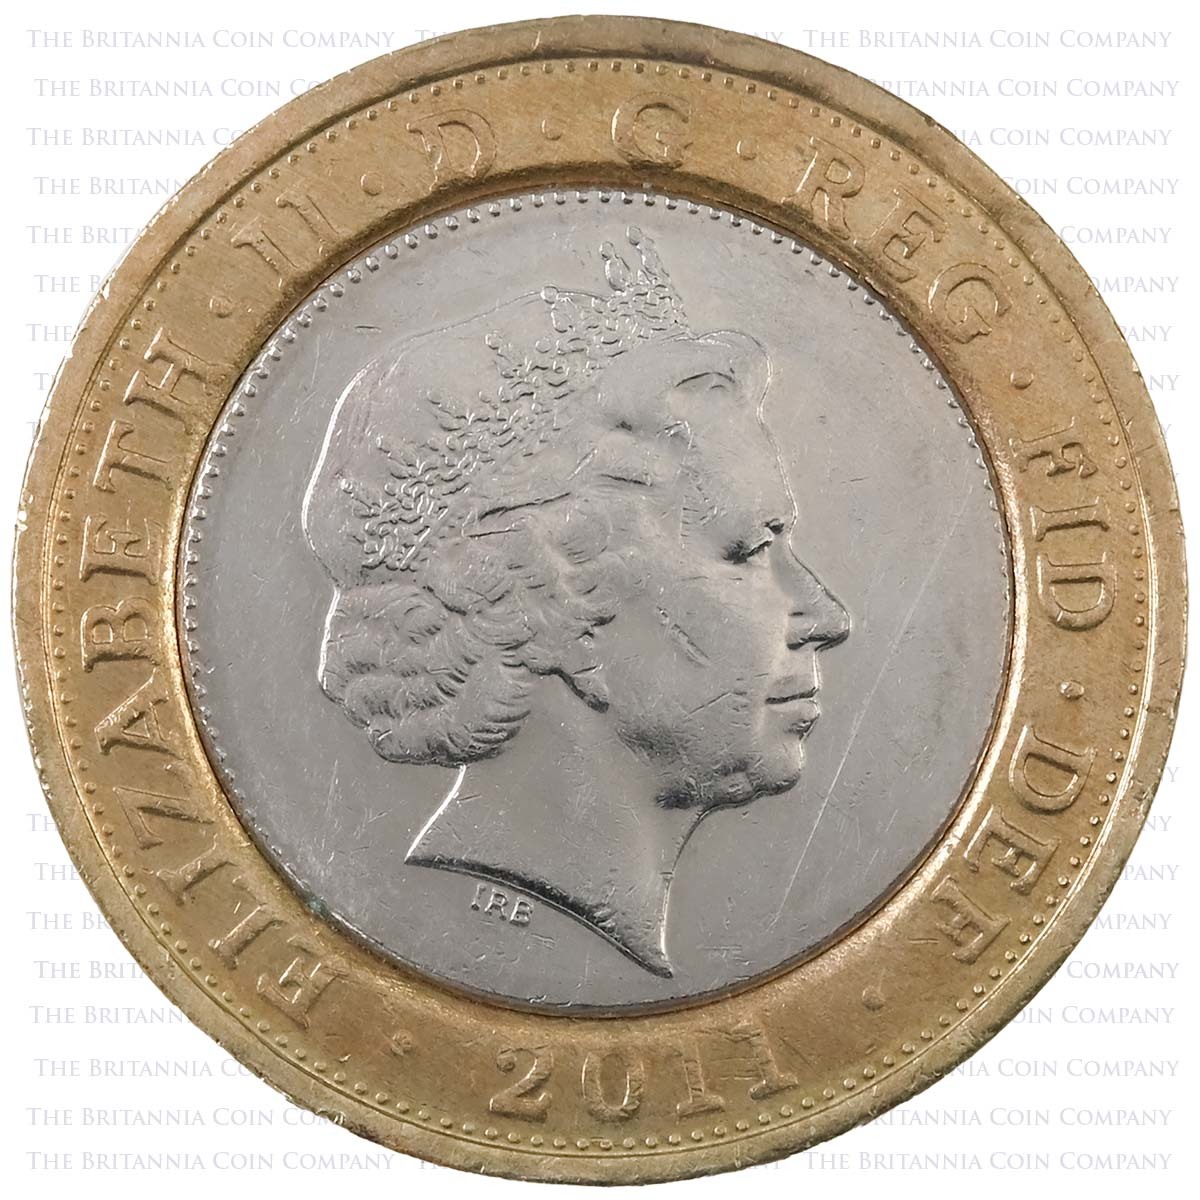 2011 Mary Rose Circulated Two Pound Coin Obverse